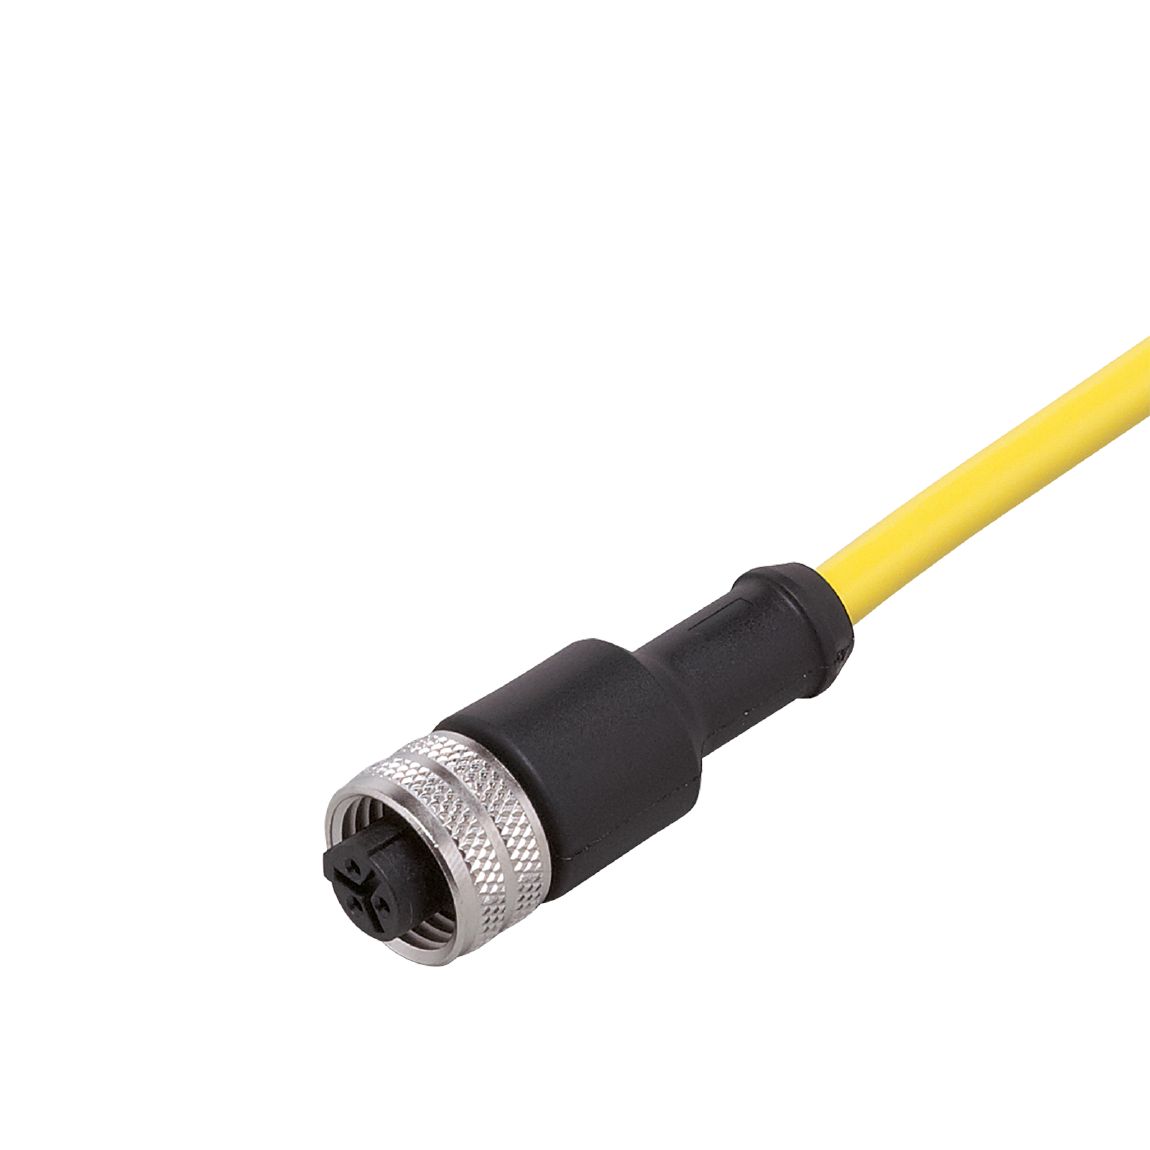 E10189 - Connecting cable with socket - ifm